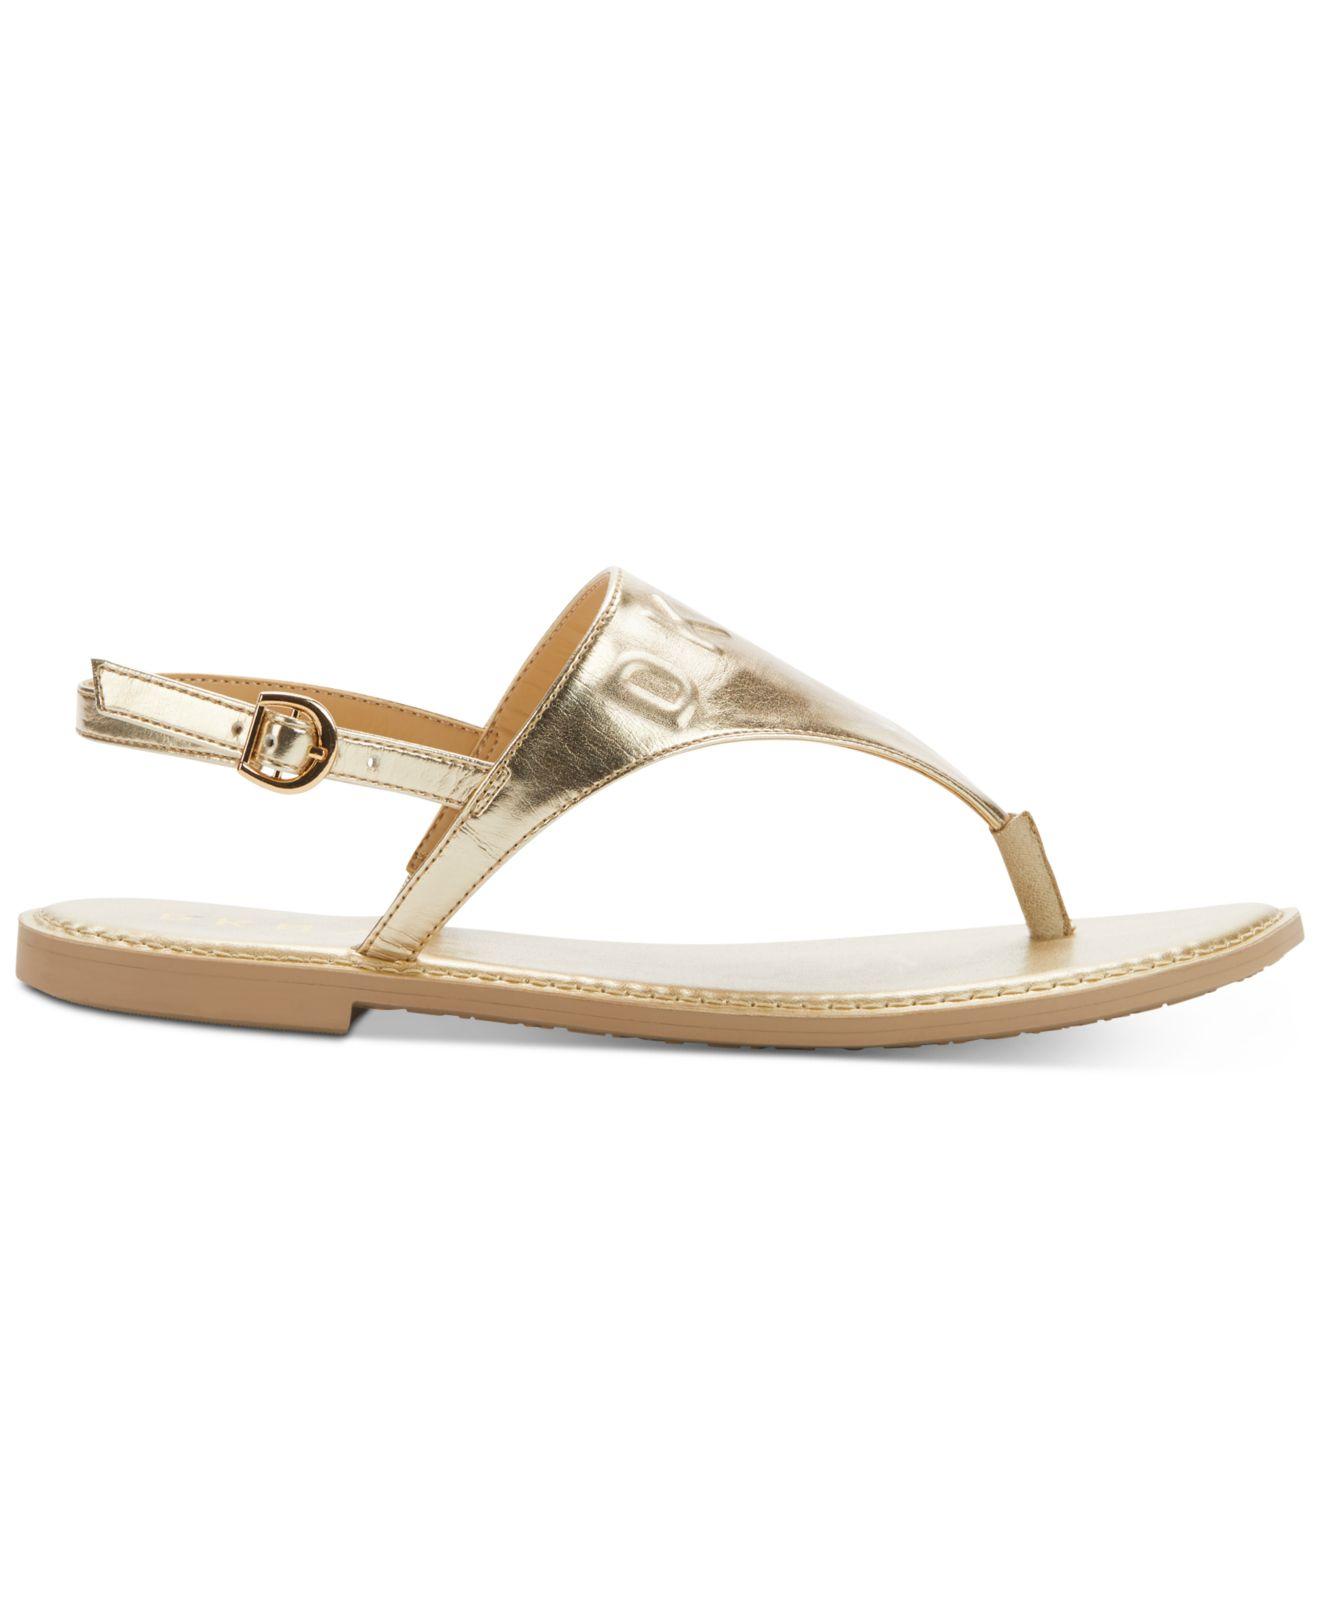 DKNY Solar Sandals, Created For Macy's in Gold (Metallic) - Lyst